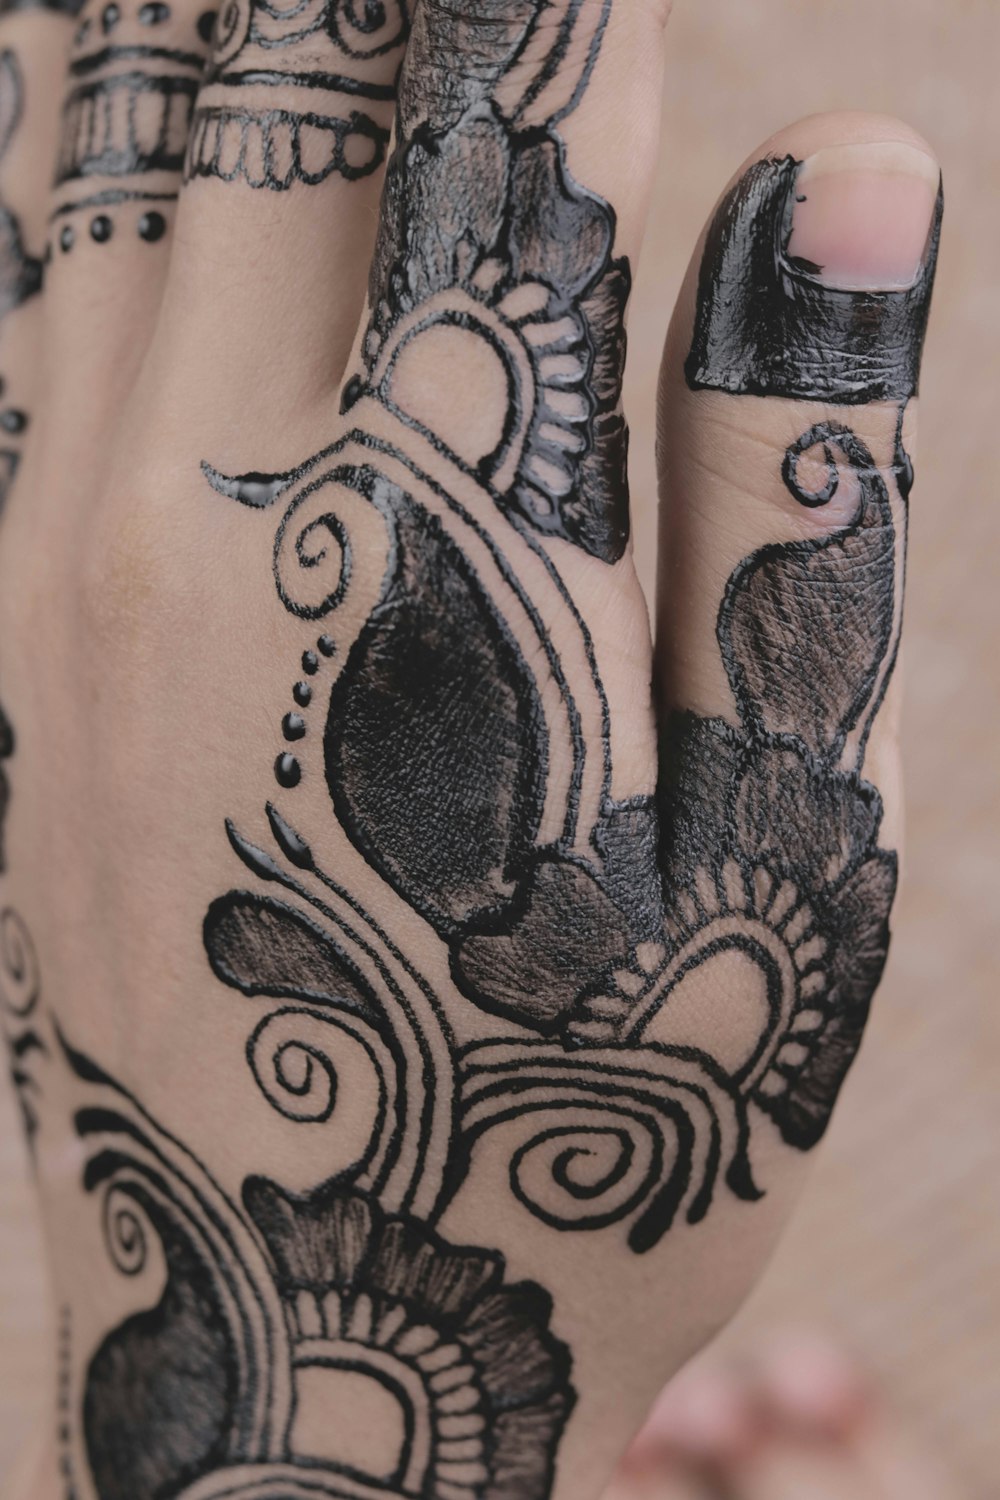 a woman's hand with a tattoo on it